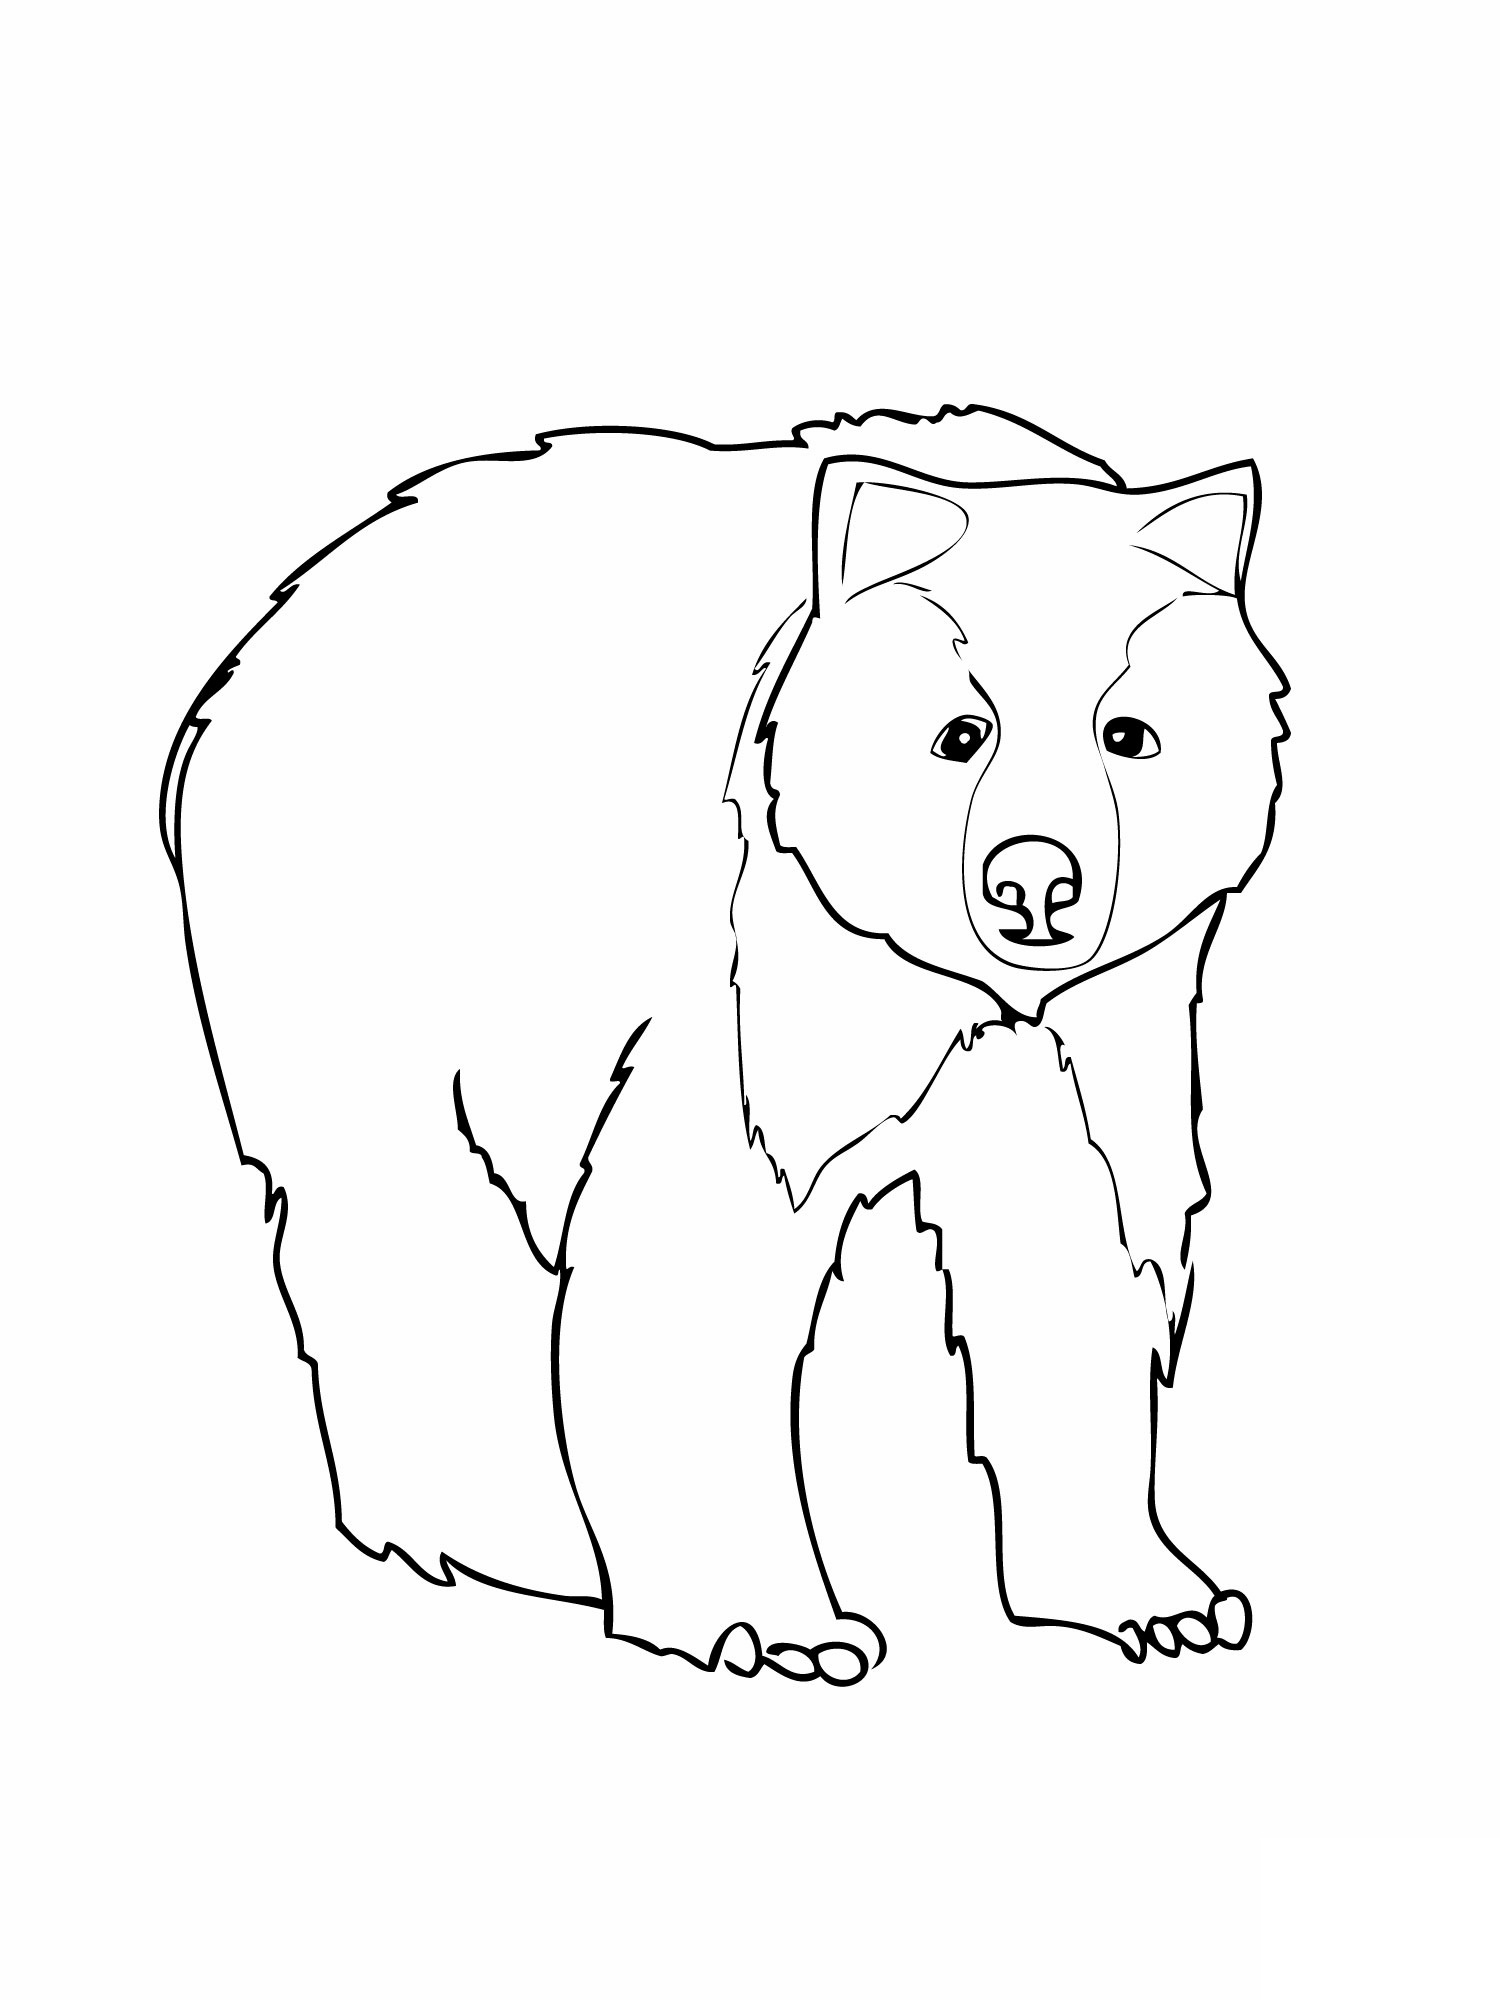 behold-sportive-bear-coloring-sheet-admiring-brighten-up-your-funny